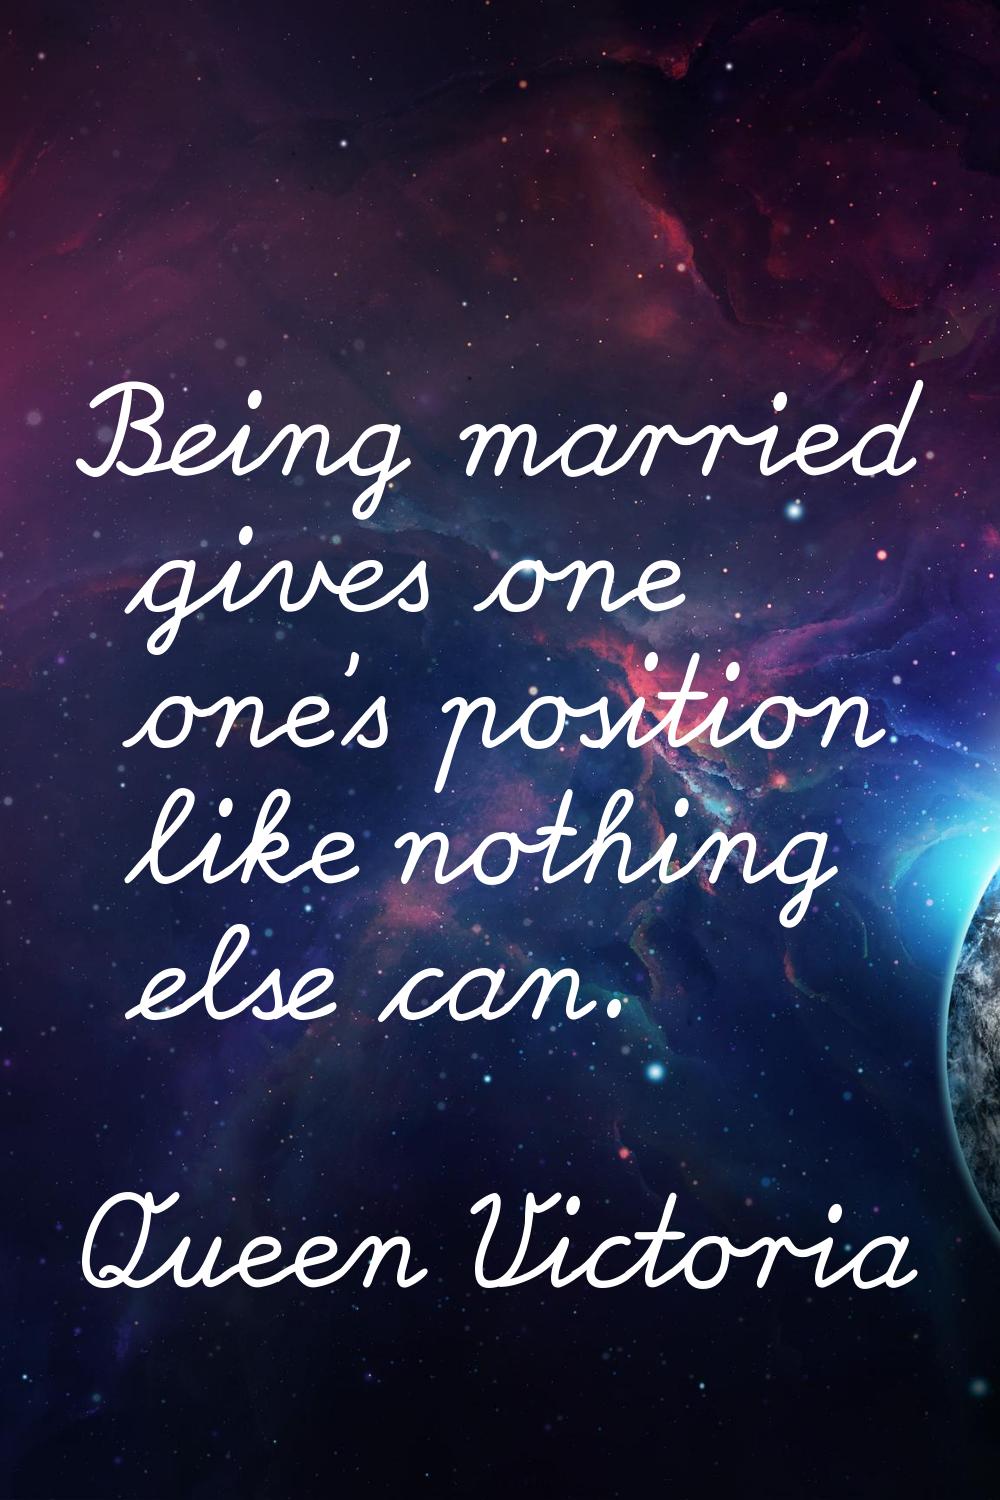 Being married gives one one's position like nothing else can.